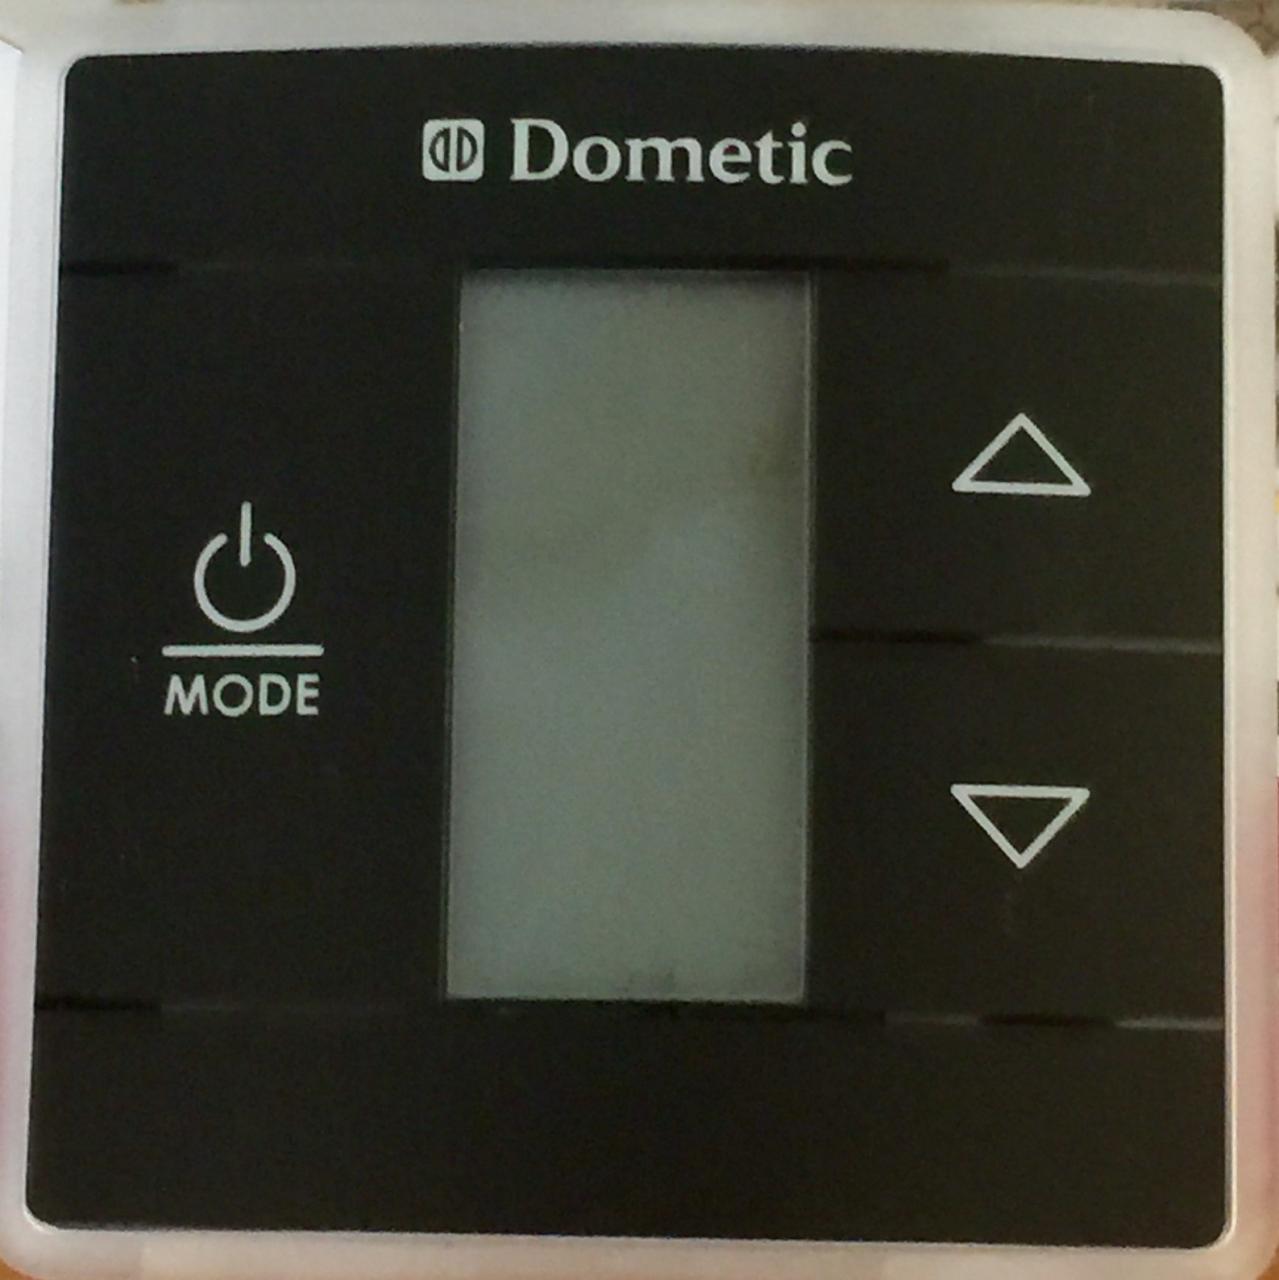 New Dometic Thermostat Changeout - Forest River Forums